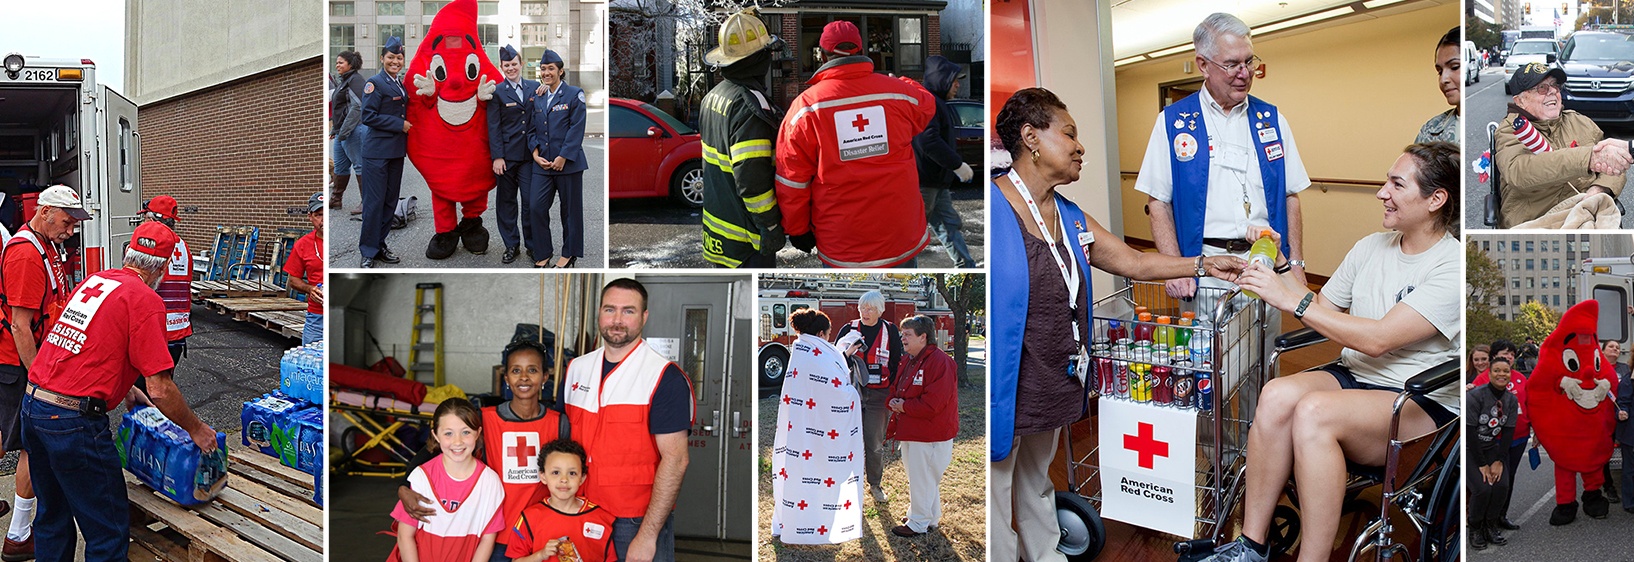 Quattro Launches Local “Everyday People” Giving Campaign for the American Red Cross Eastern Pennsylvania Region